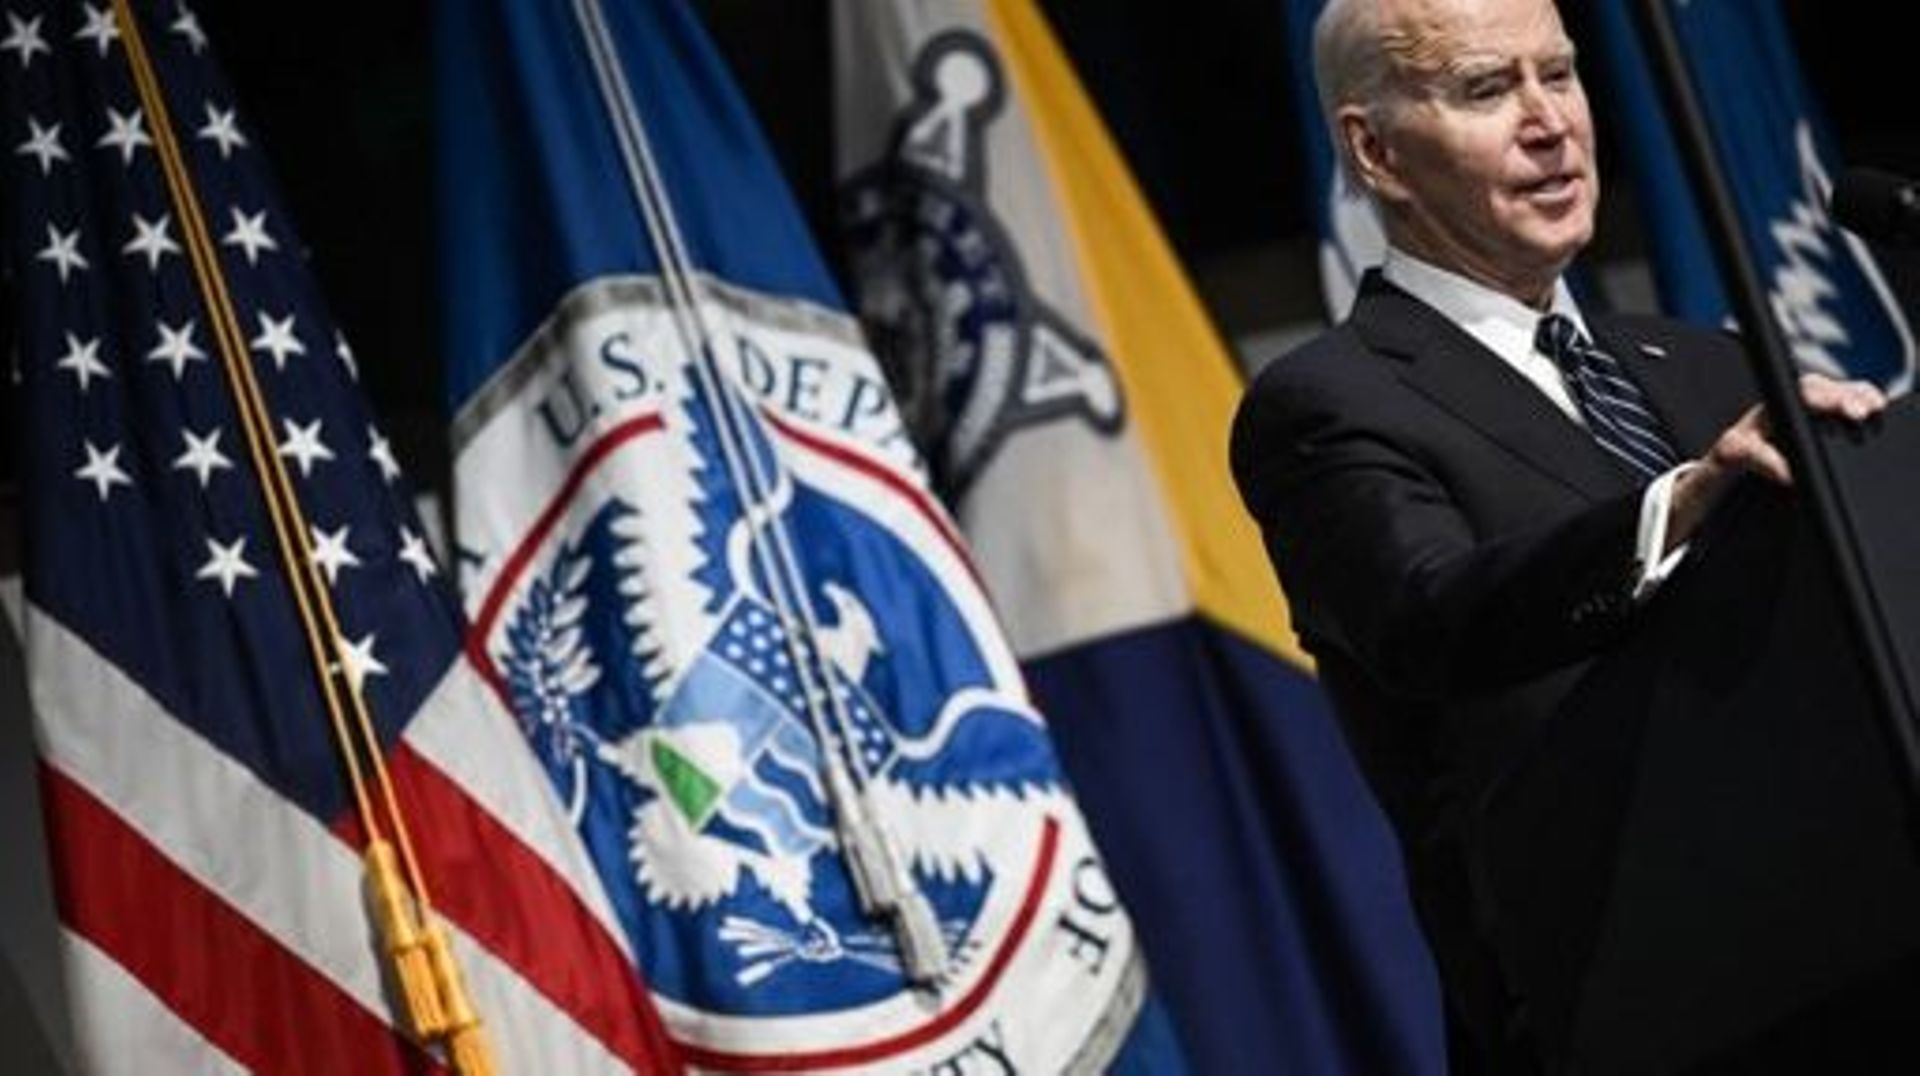 US President Joe Biden speaks at the Department of Homeland Security (DHS) 20th Anniversary Ceremony at DHS headquarters in Washington, DC, on March 1, 2023 Brendan SMIALOWSKI / AFP